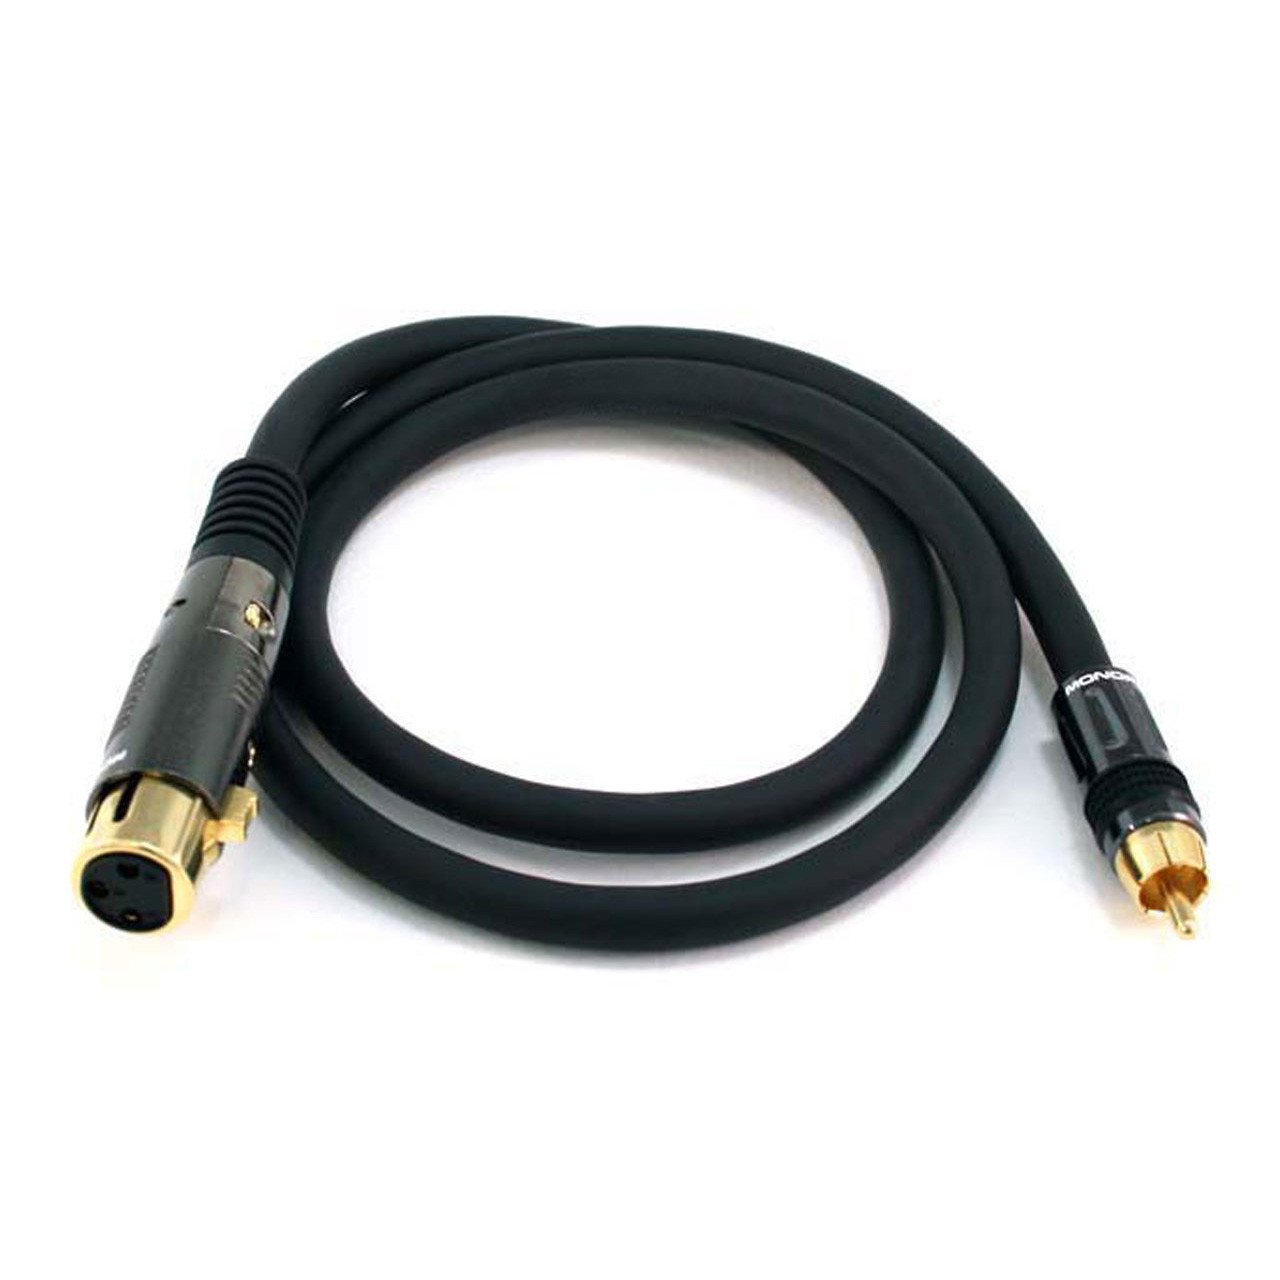 Cables & Adapters - Proel CHLP270LU15 - RCA Plug To XLR Female 1.5m Cable